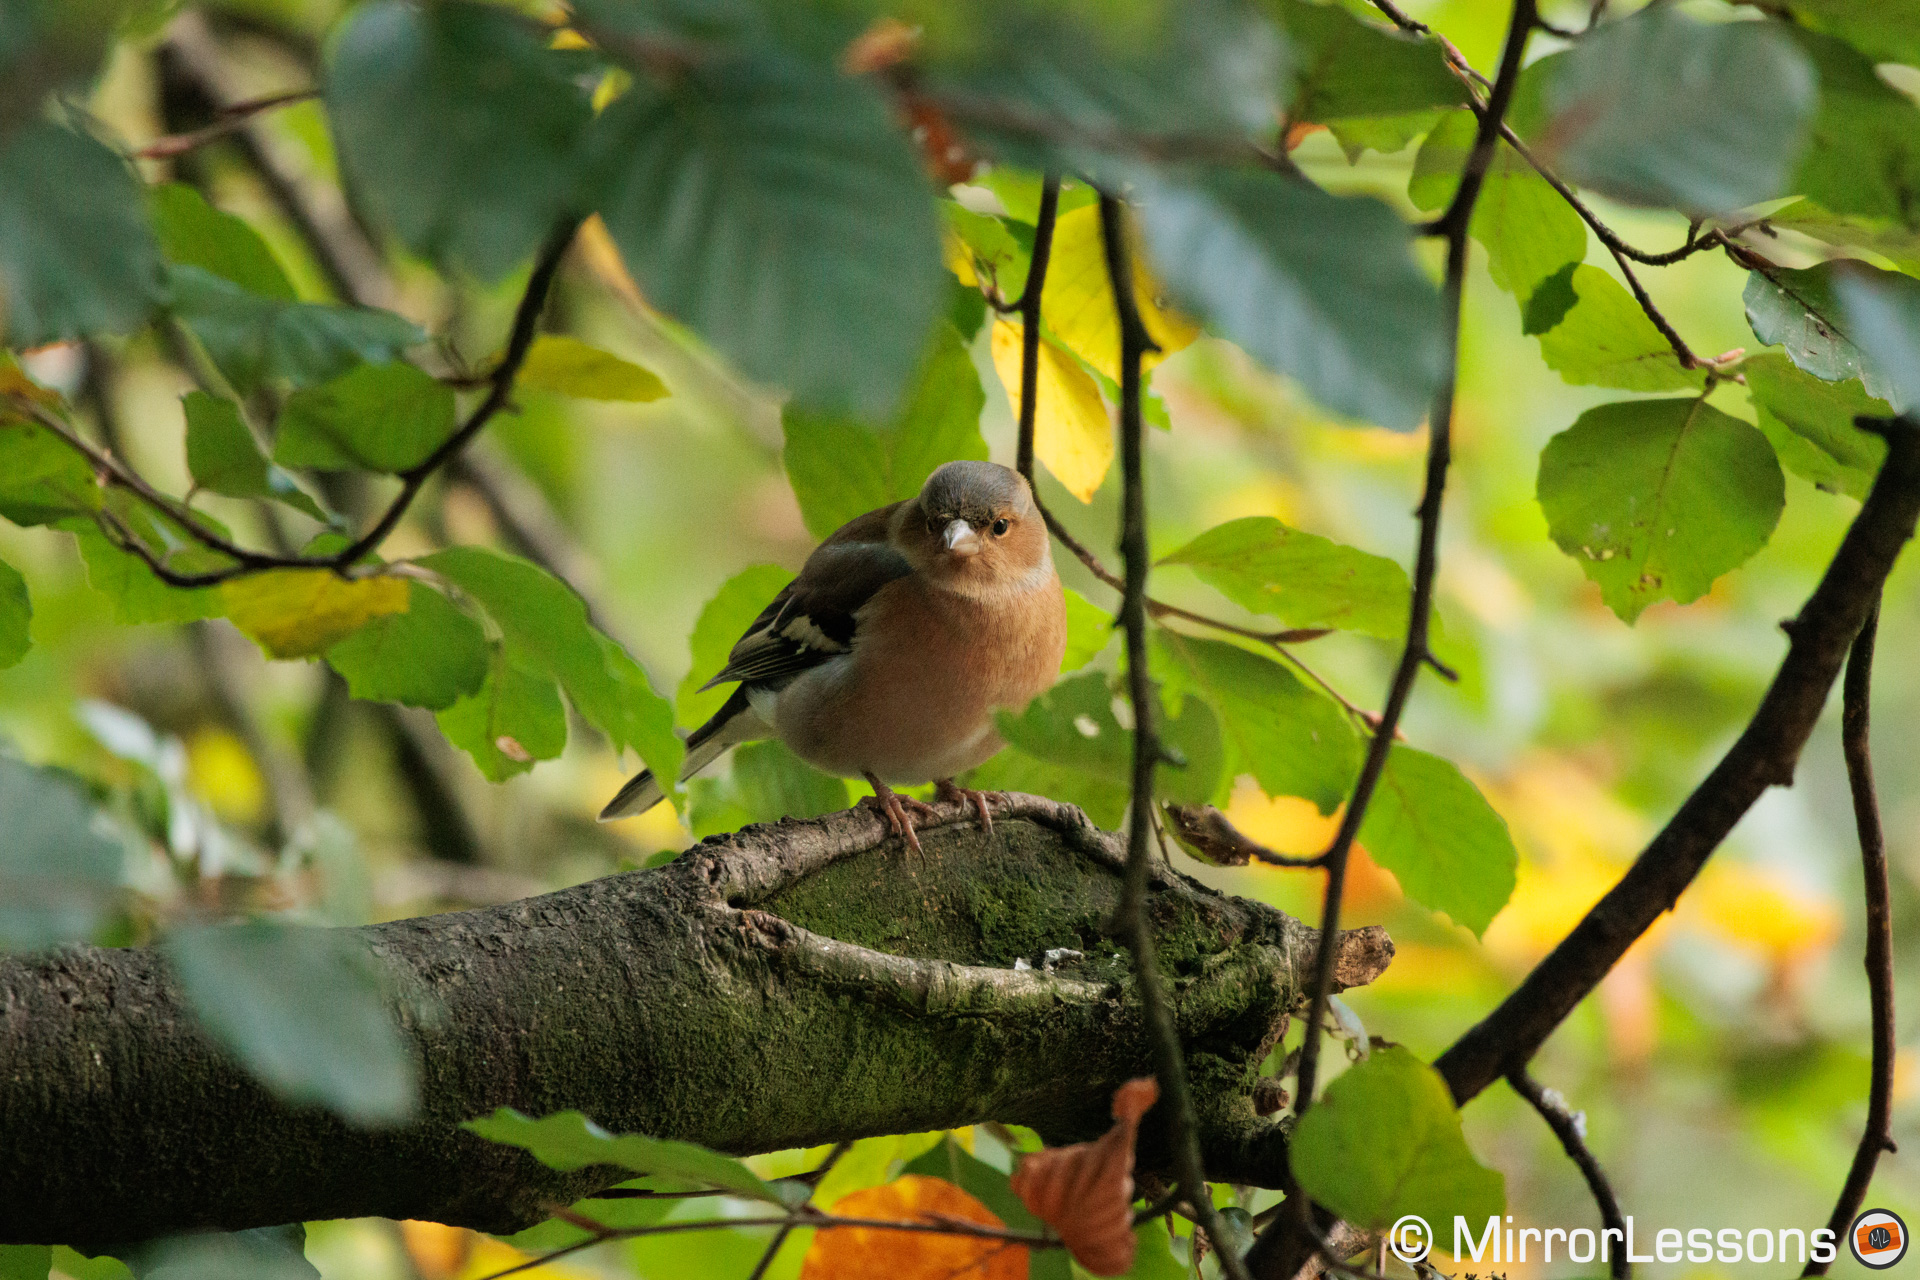 Chaffinch on a thick branch surrounded by leaves and thin branches